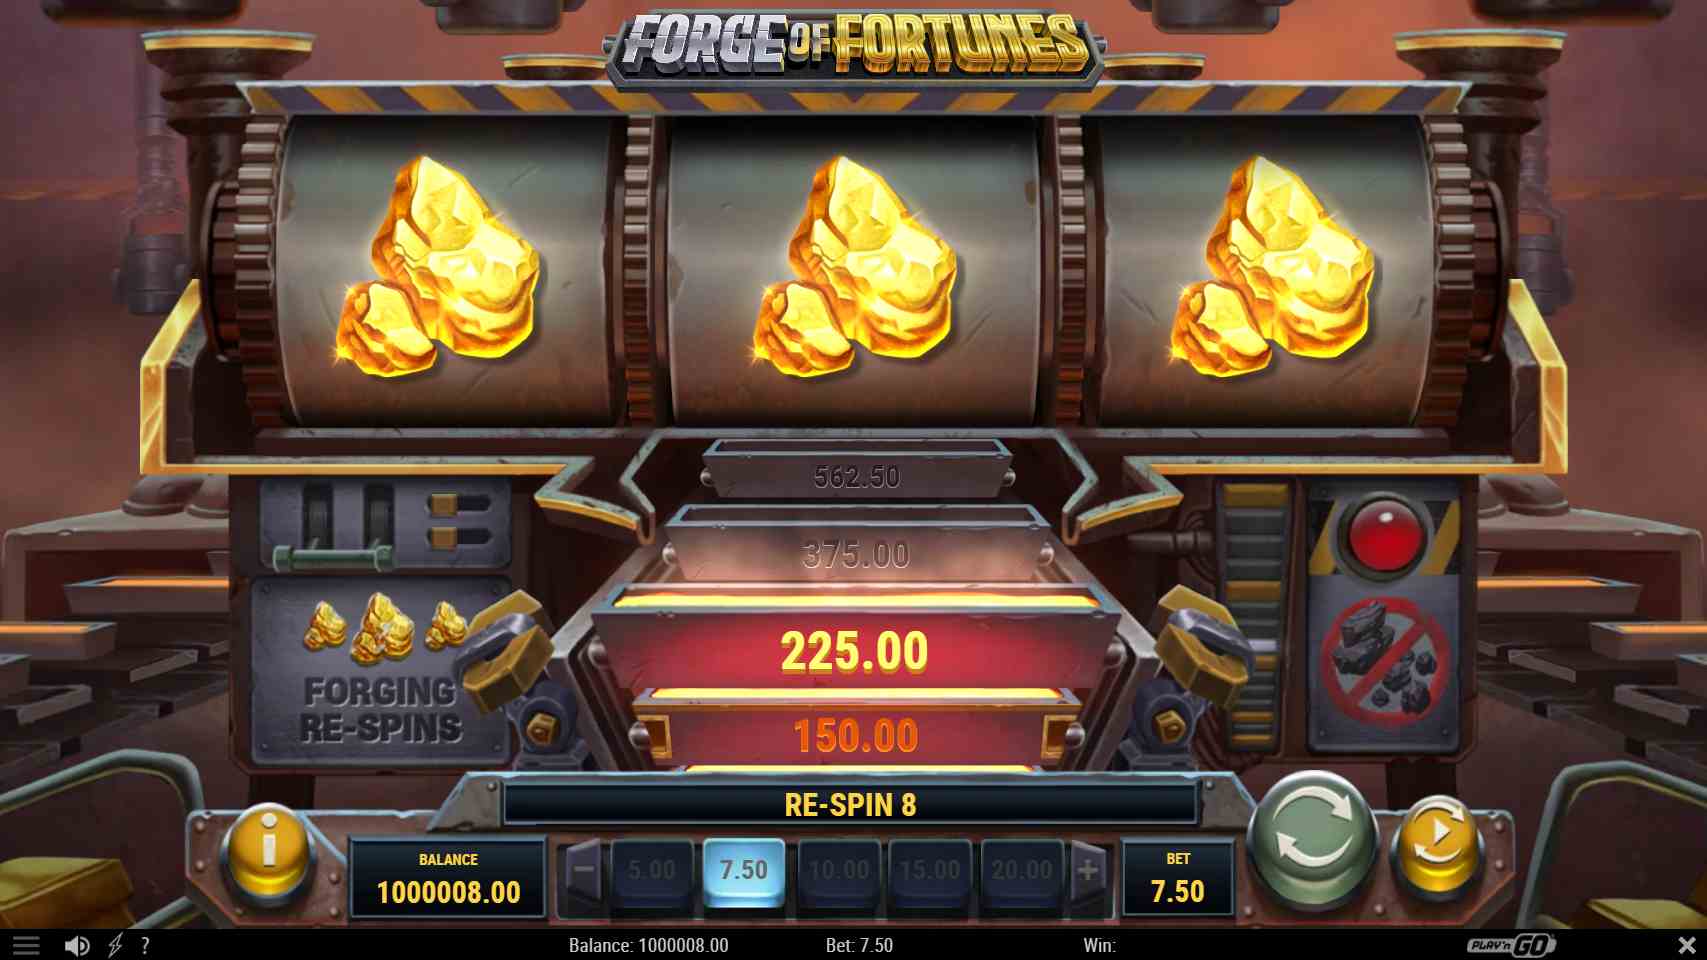 Forge of Fortunes Forging Respins